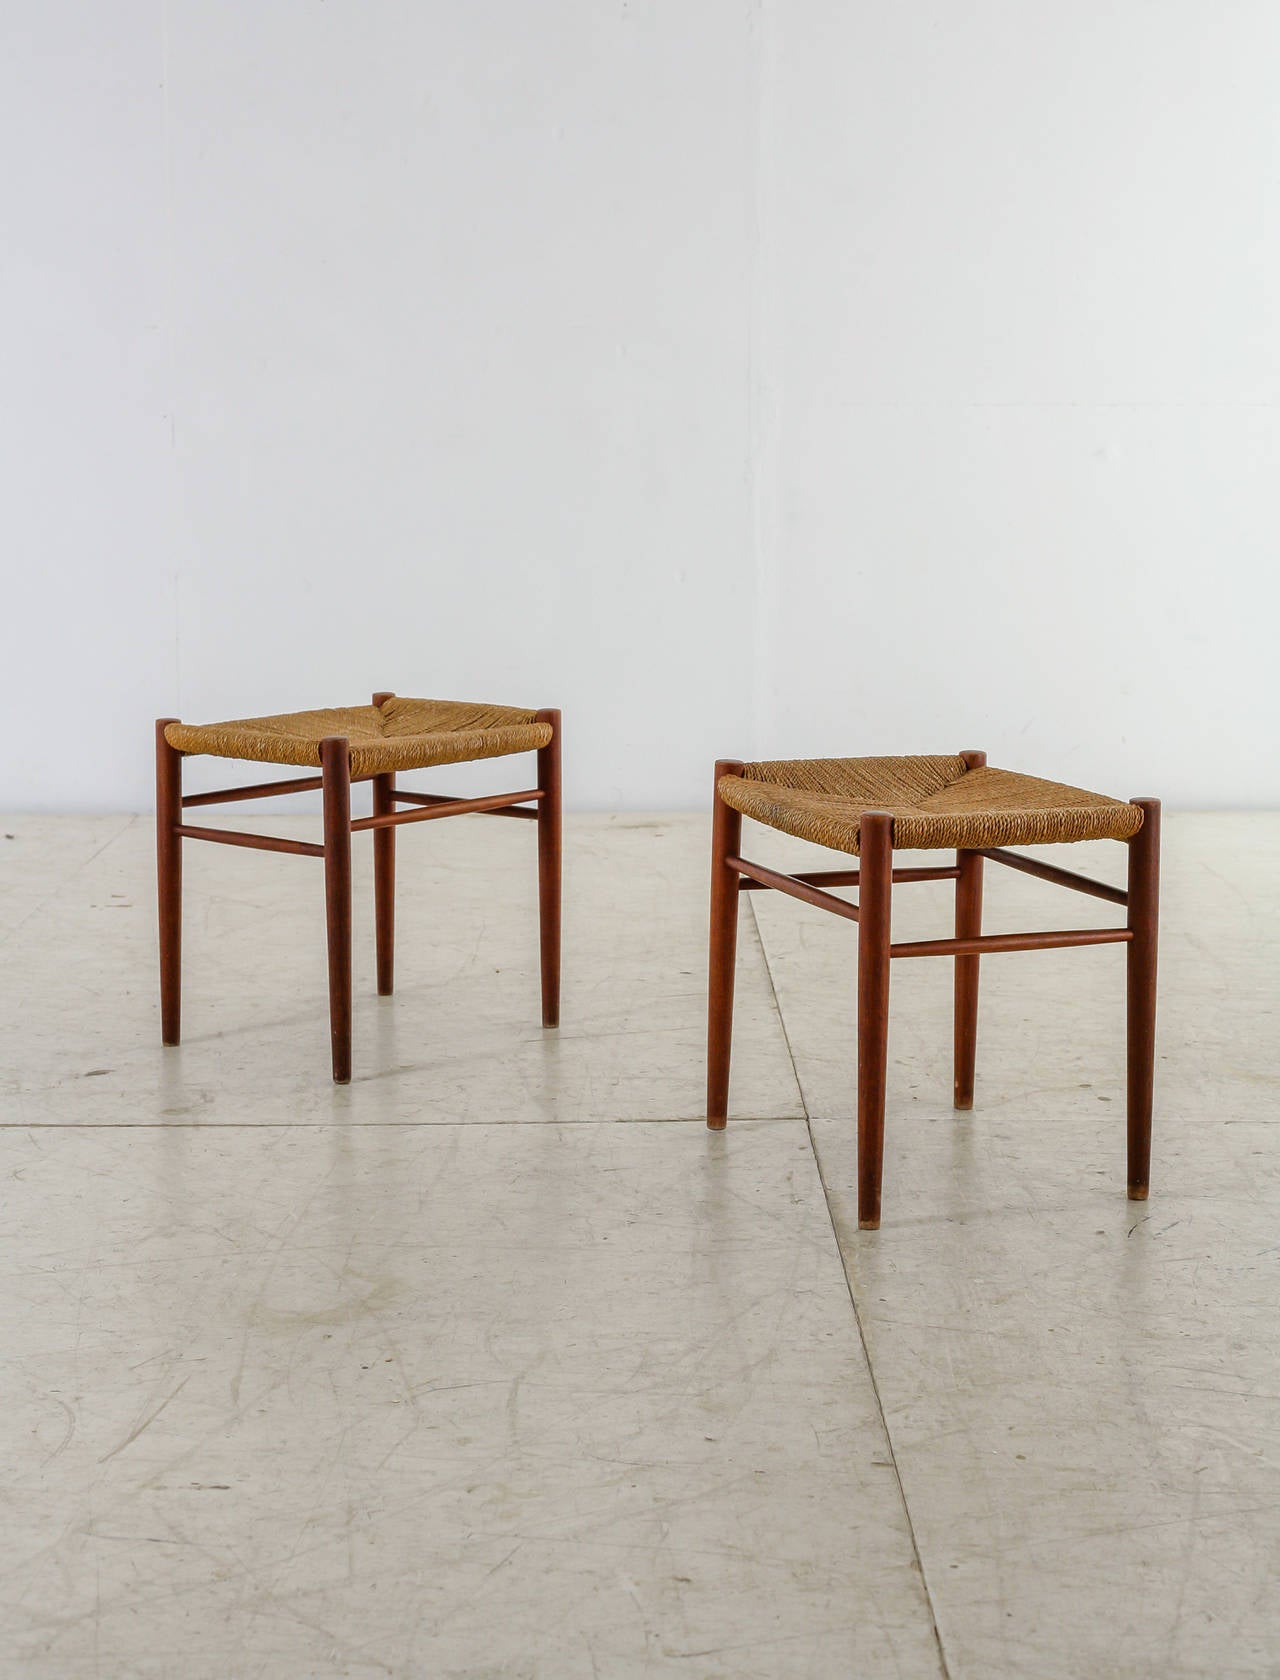 A pair of teak stools by Peter Hvidt & Orla Mølgaard-Nielsen for Søborg Møbelfabrik. The stools have a woven papercord seating, which is in a great condition.